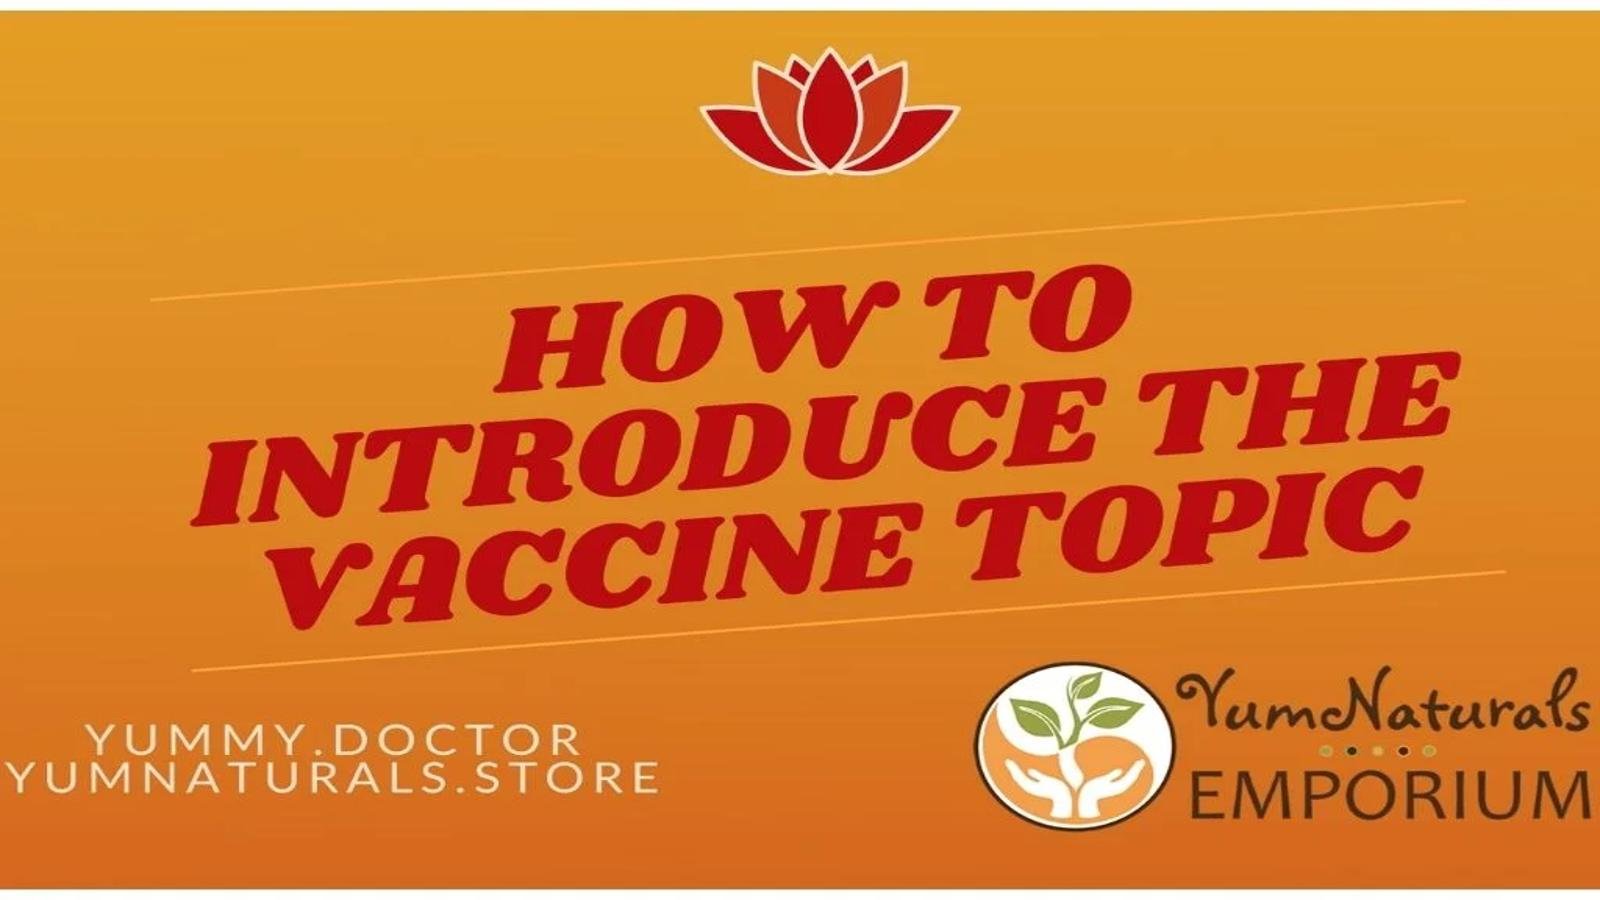 Yummy-Doctor-Holistic-Health-Education-Blog-How-To-Introduce-the-Vaccine-Topic